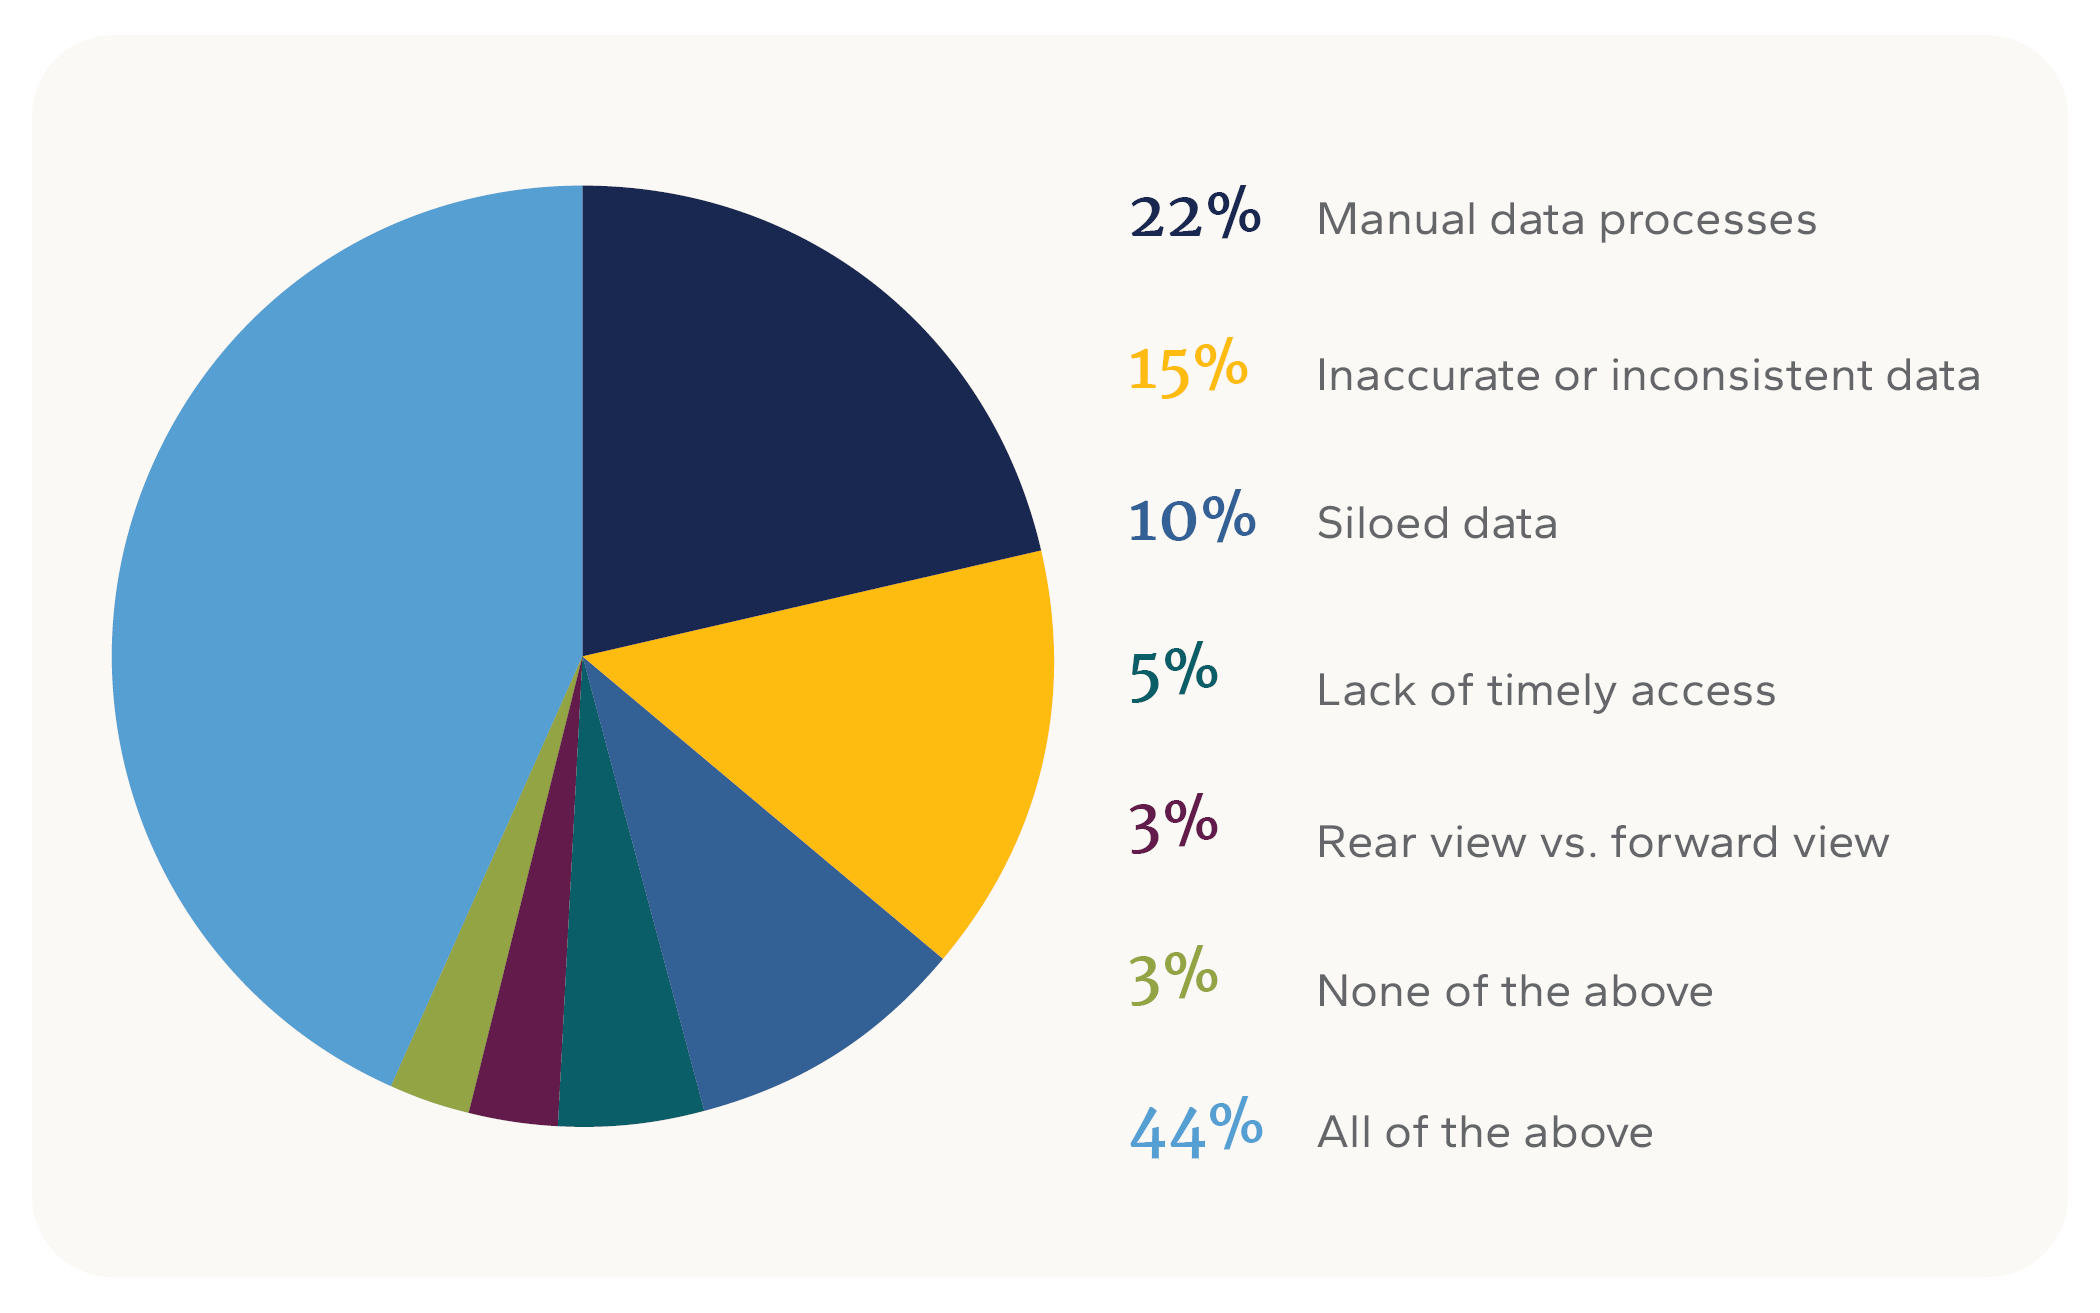 Pie chart identifying the impact of poor data on their organizations.